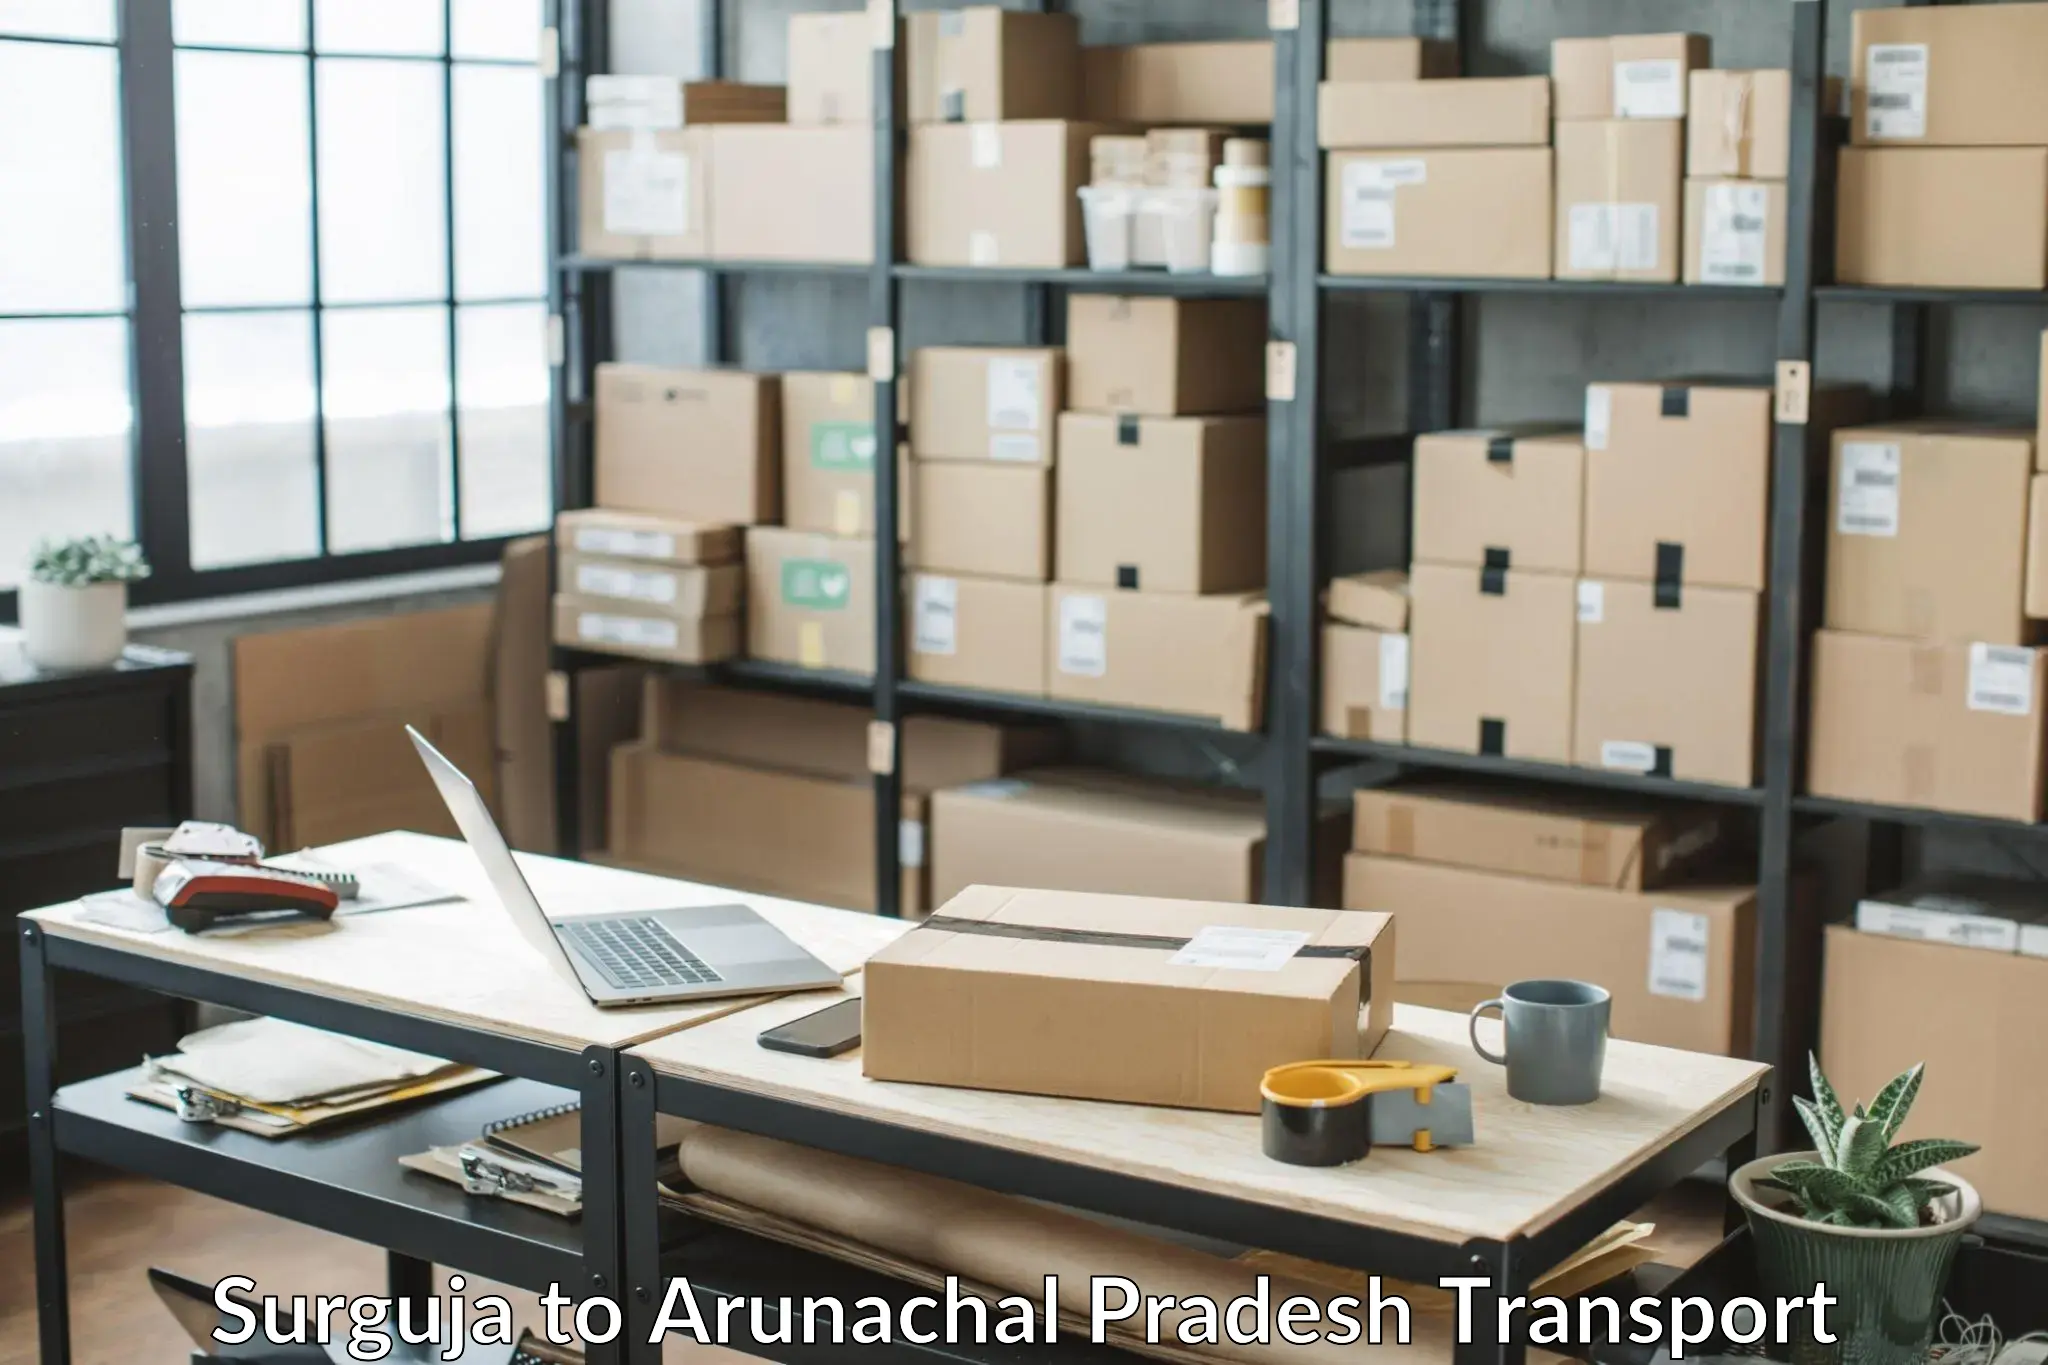 Daily parcel service transport Surguja to Dirang